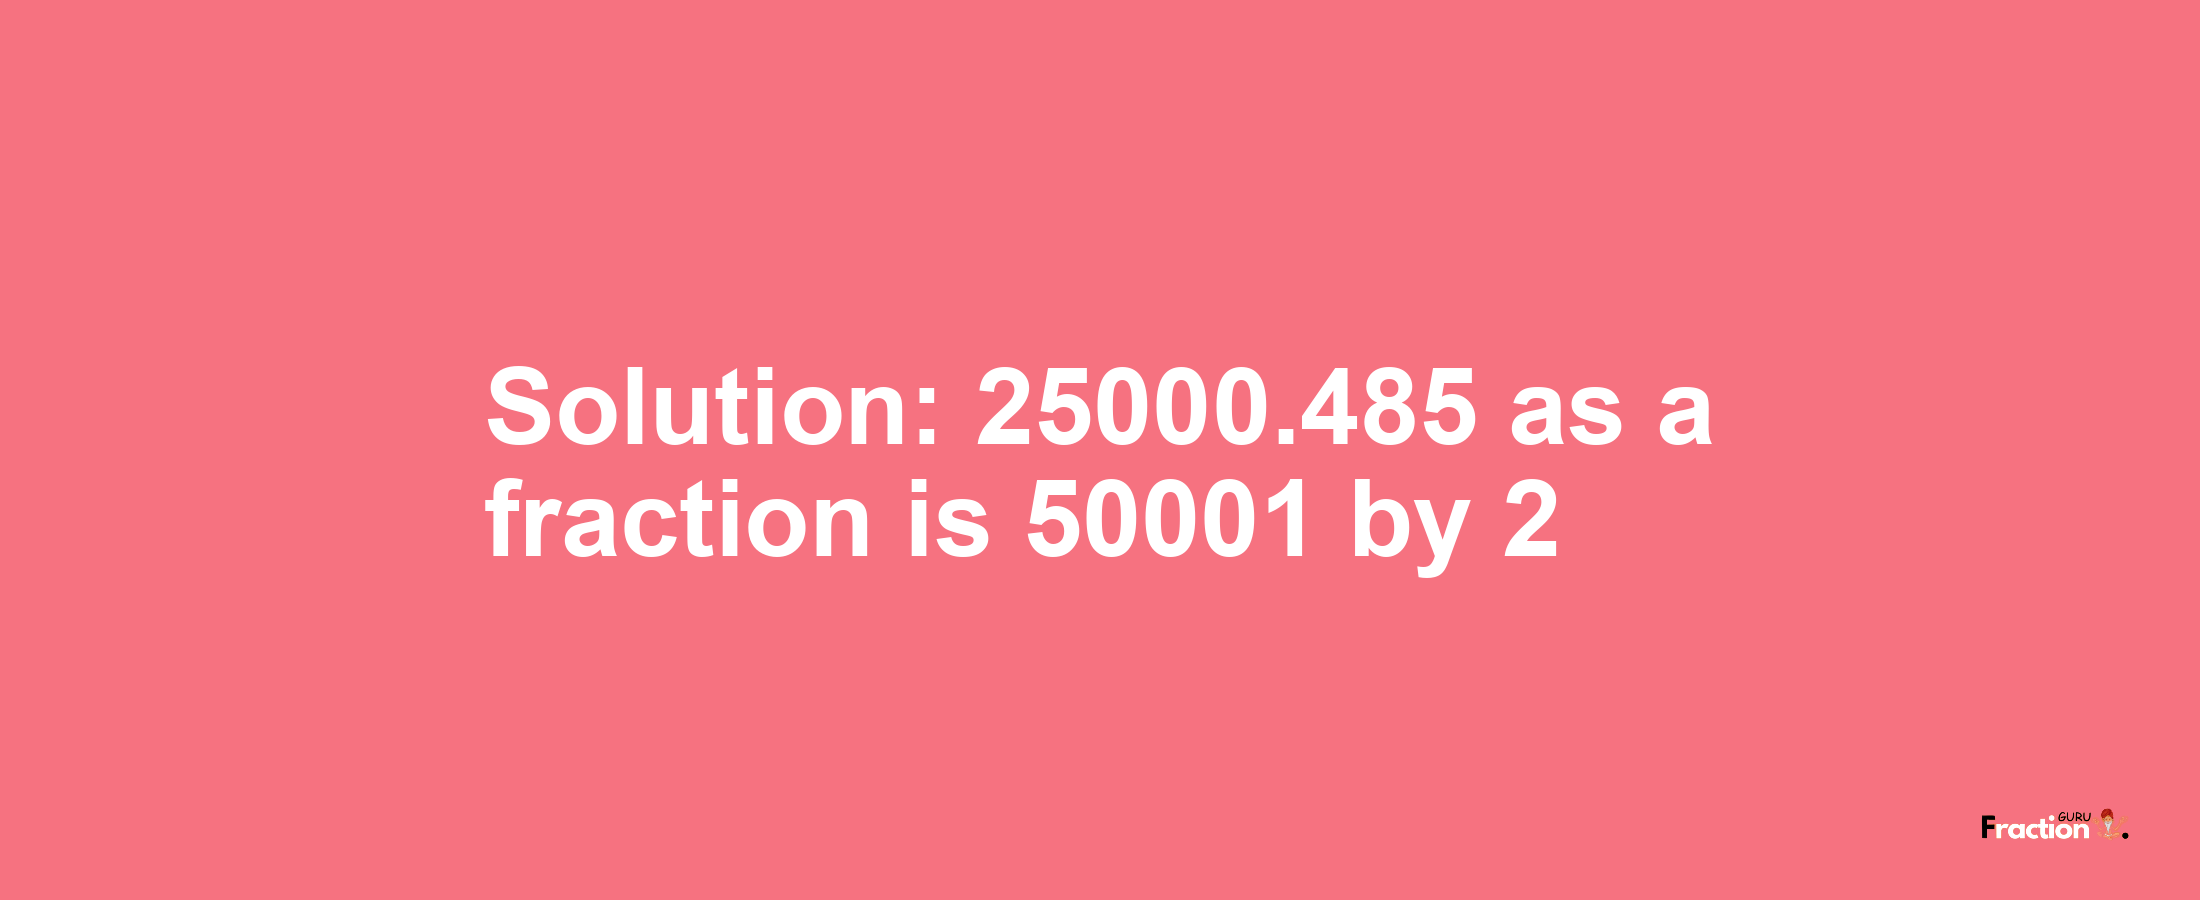 Solution:25000.485 as a fraction is 50001/2